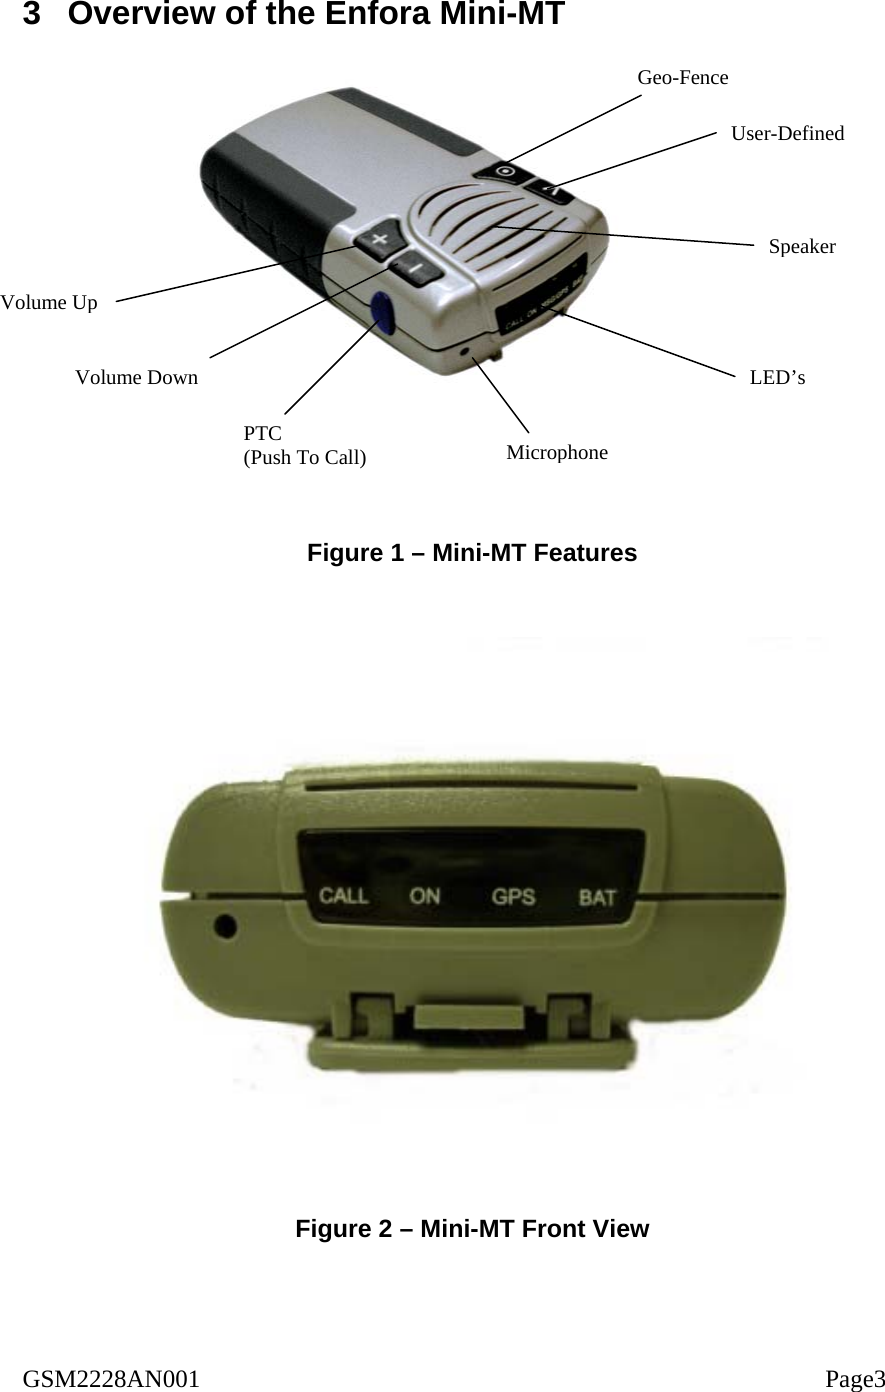  3  Overview of the Enfora Mini-MT                  Geo-Fence Volume Up PTC (Push To Call) User-Defined Speaker LED’s Volume Down MicrophoneFigure 1 – Mini-MT Features     Figure 2 – Mini-MT Front View   GSM2228AN001                                                                                                    Page3 